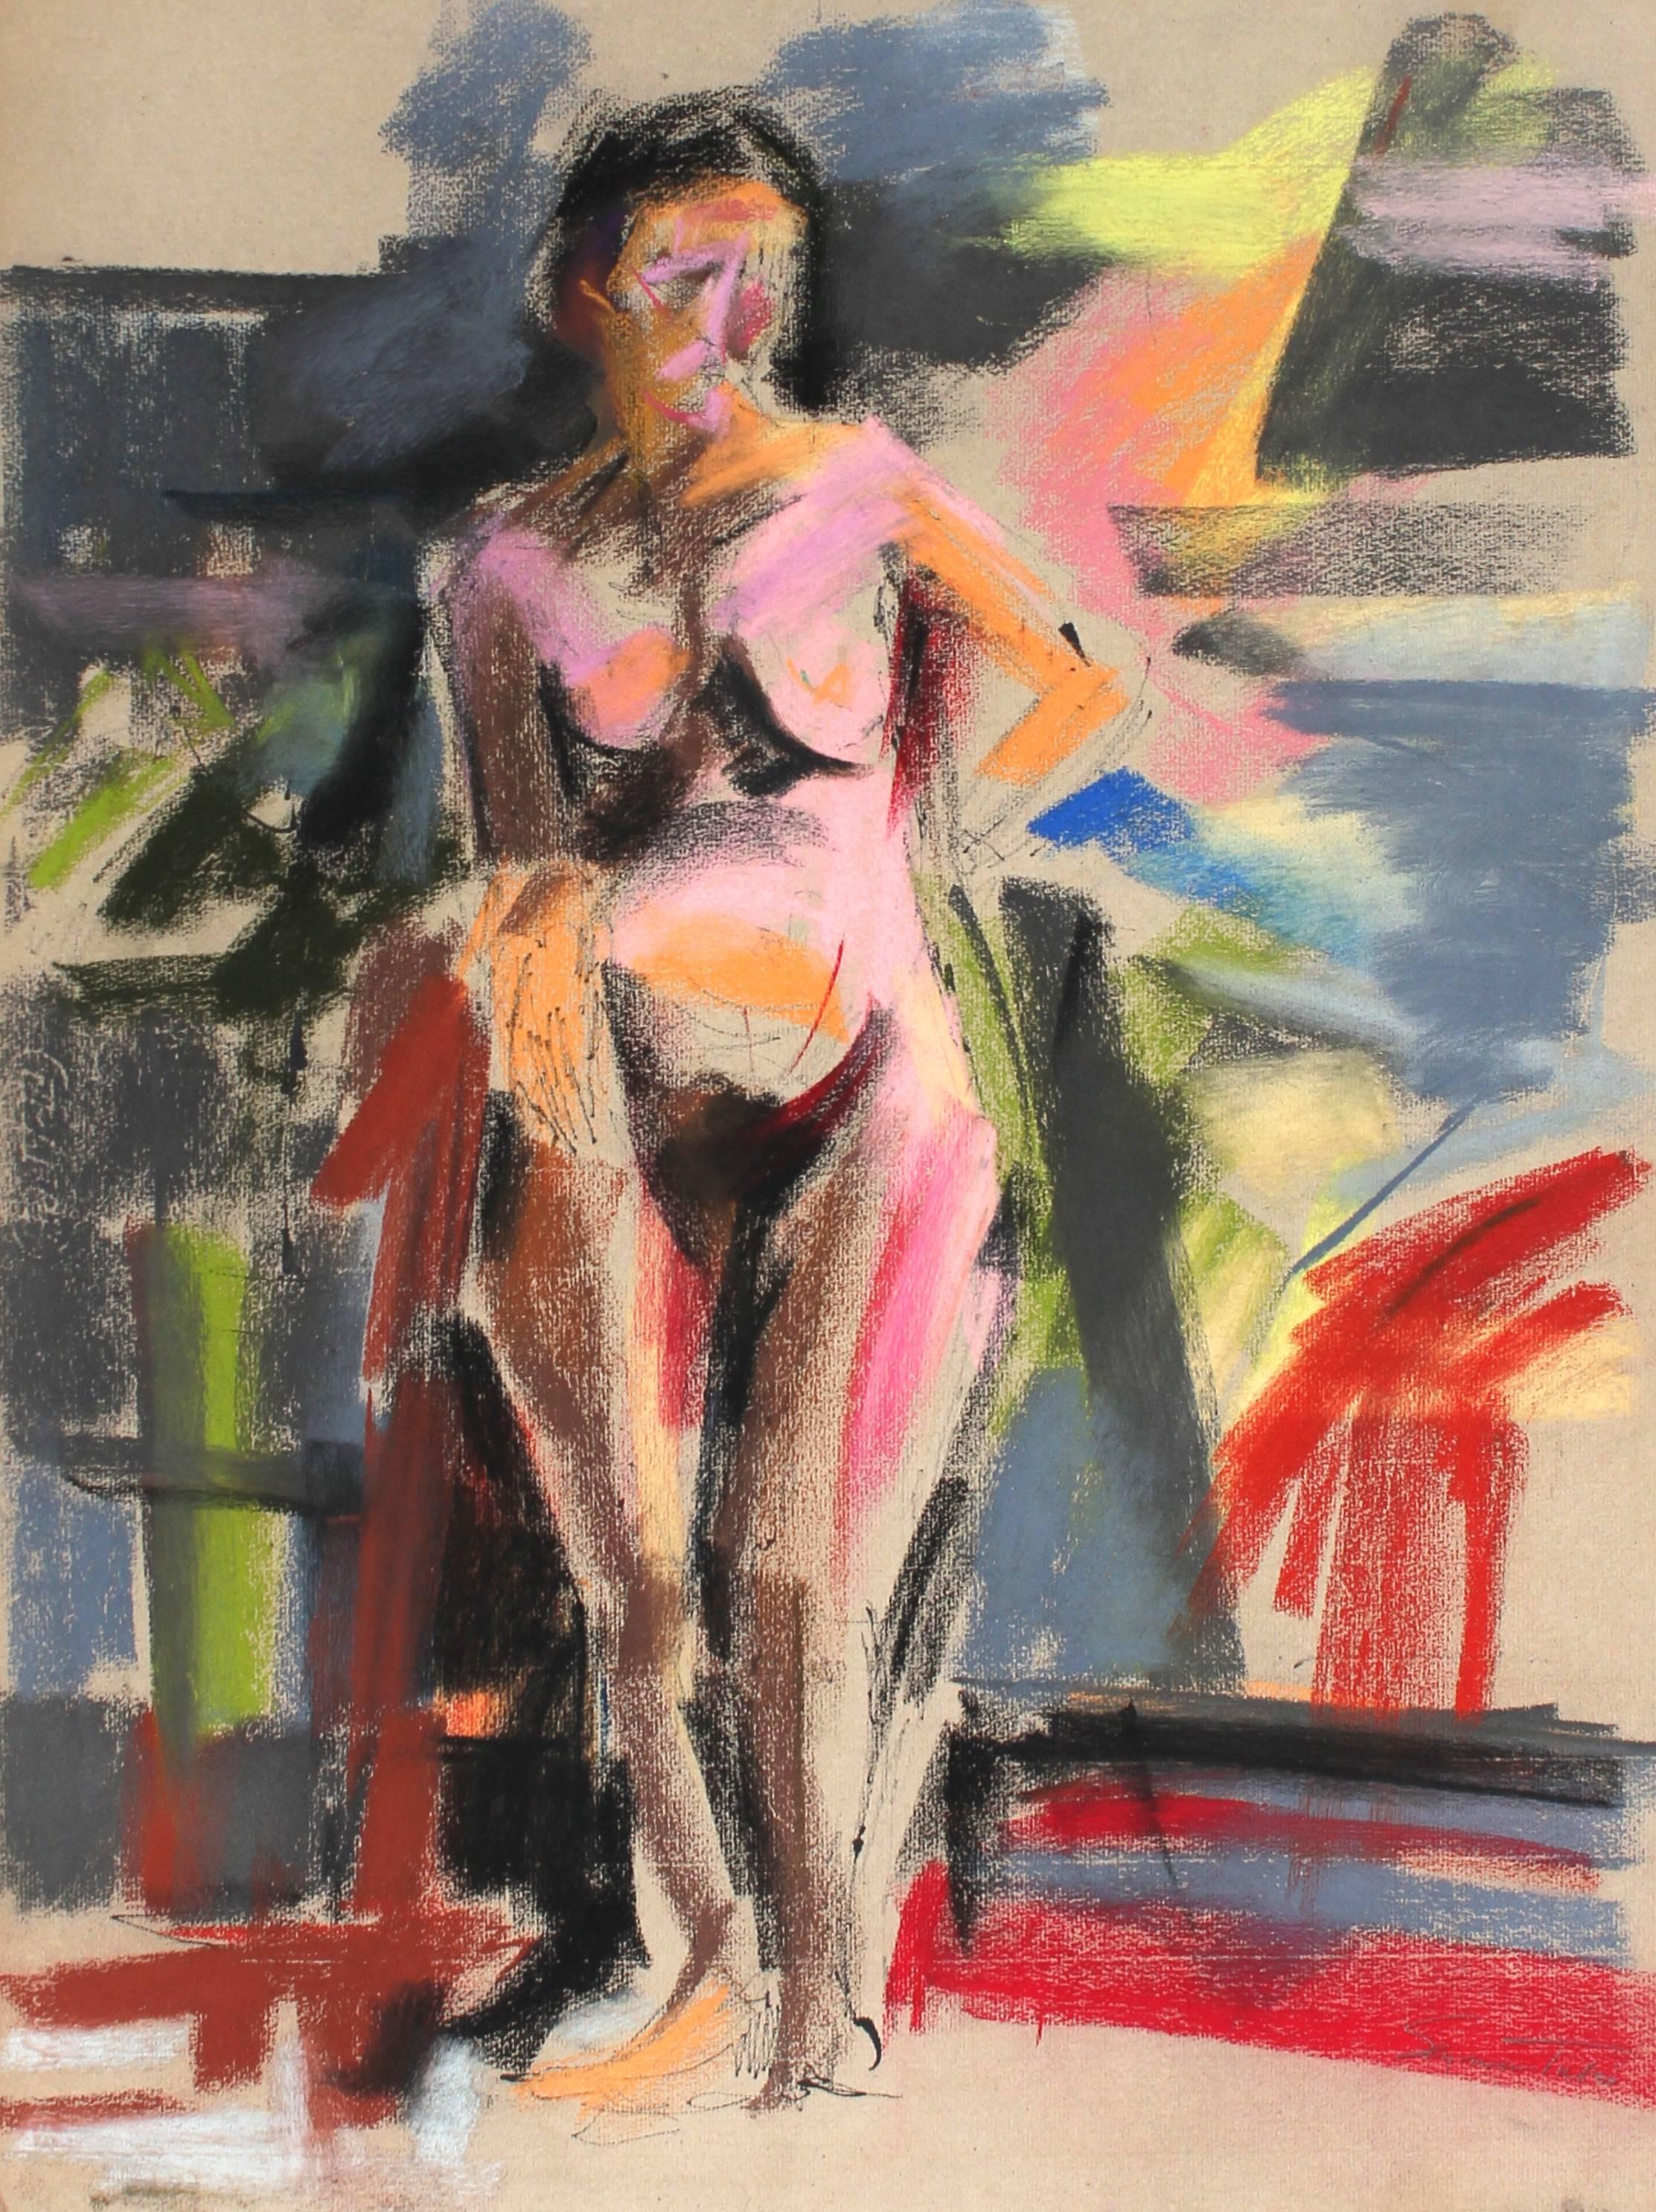 Colorful Bright Female Nude Figure in Pastel, 20th Century - Expressionist Art by Seymour Tubis